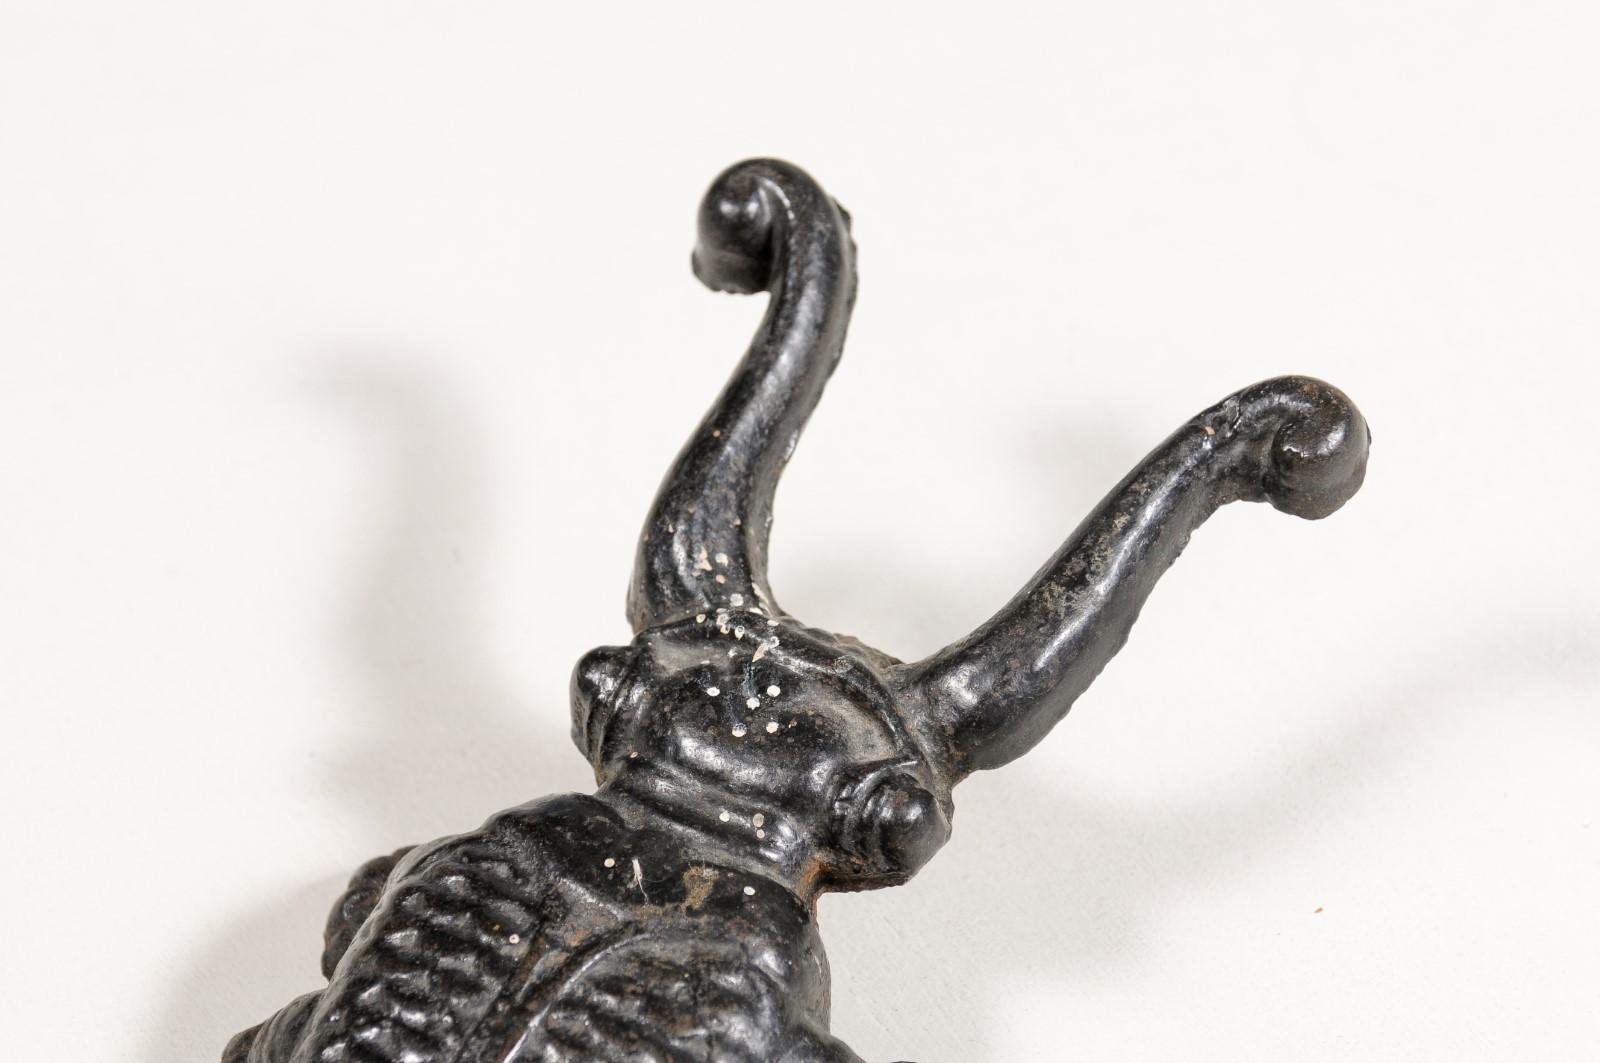 19th Century English Victorian Iron Bootjack Depicting a Cricket with Antennae 1